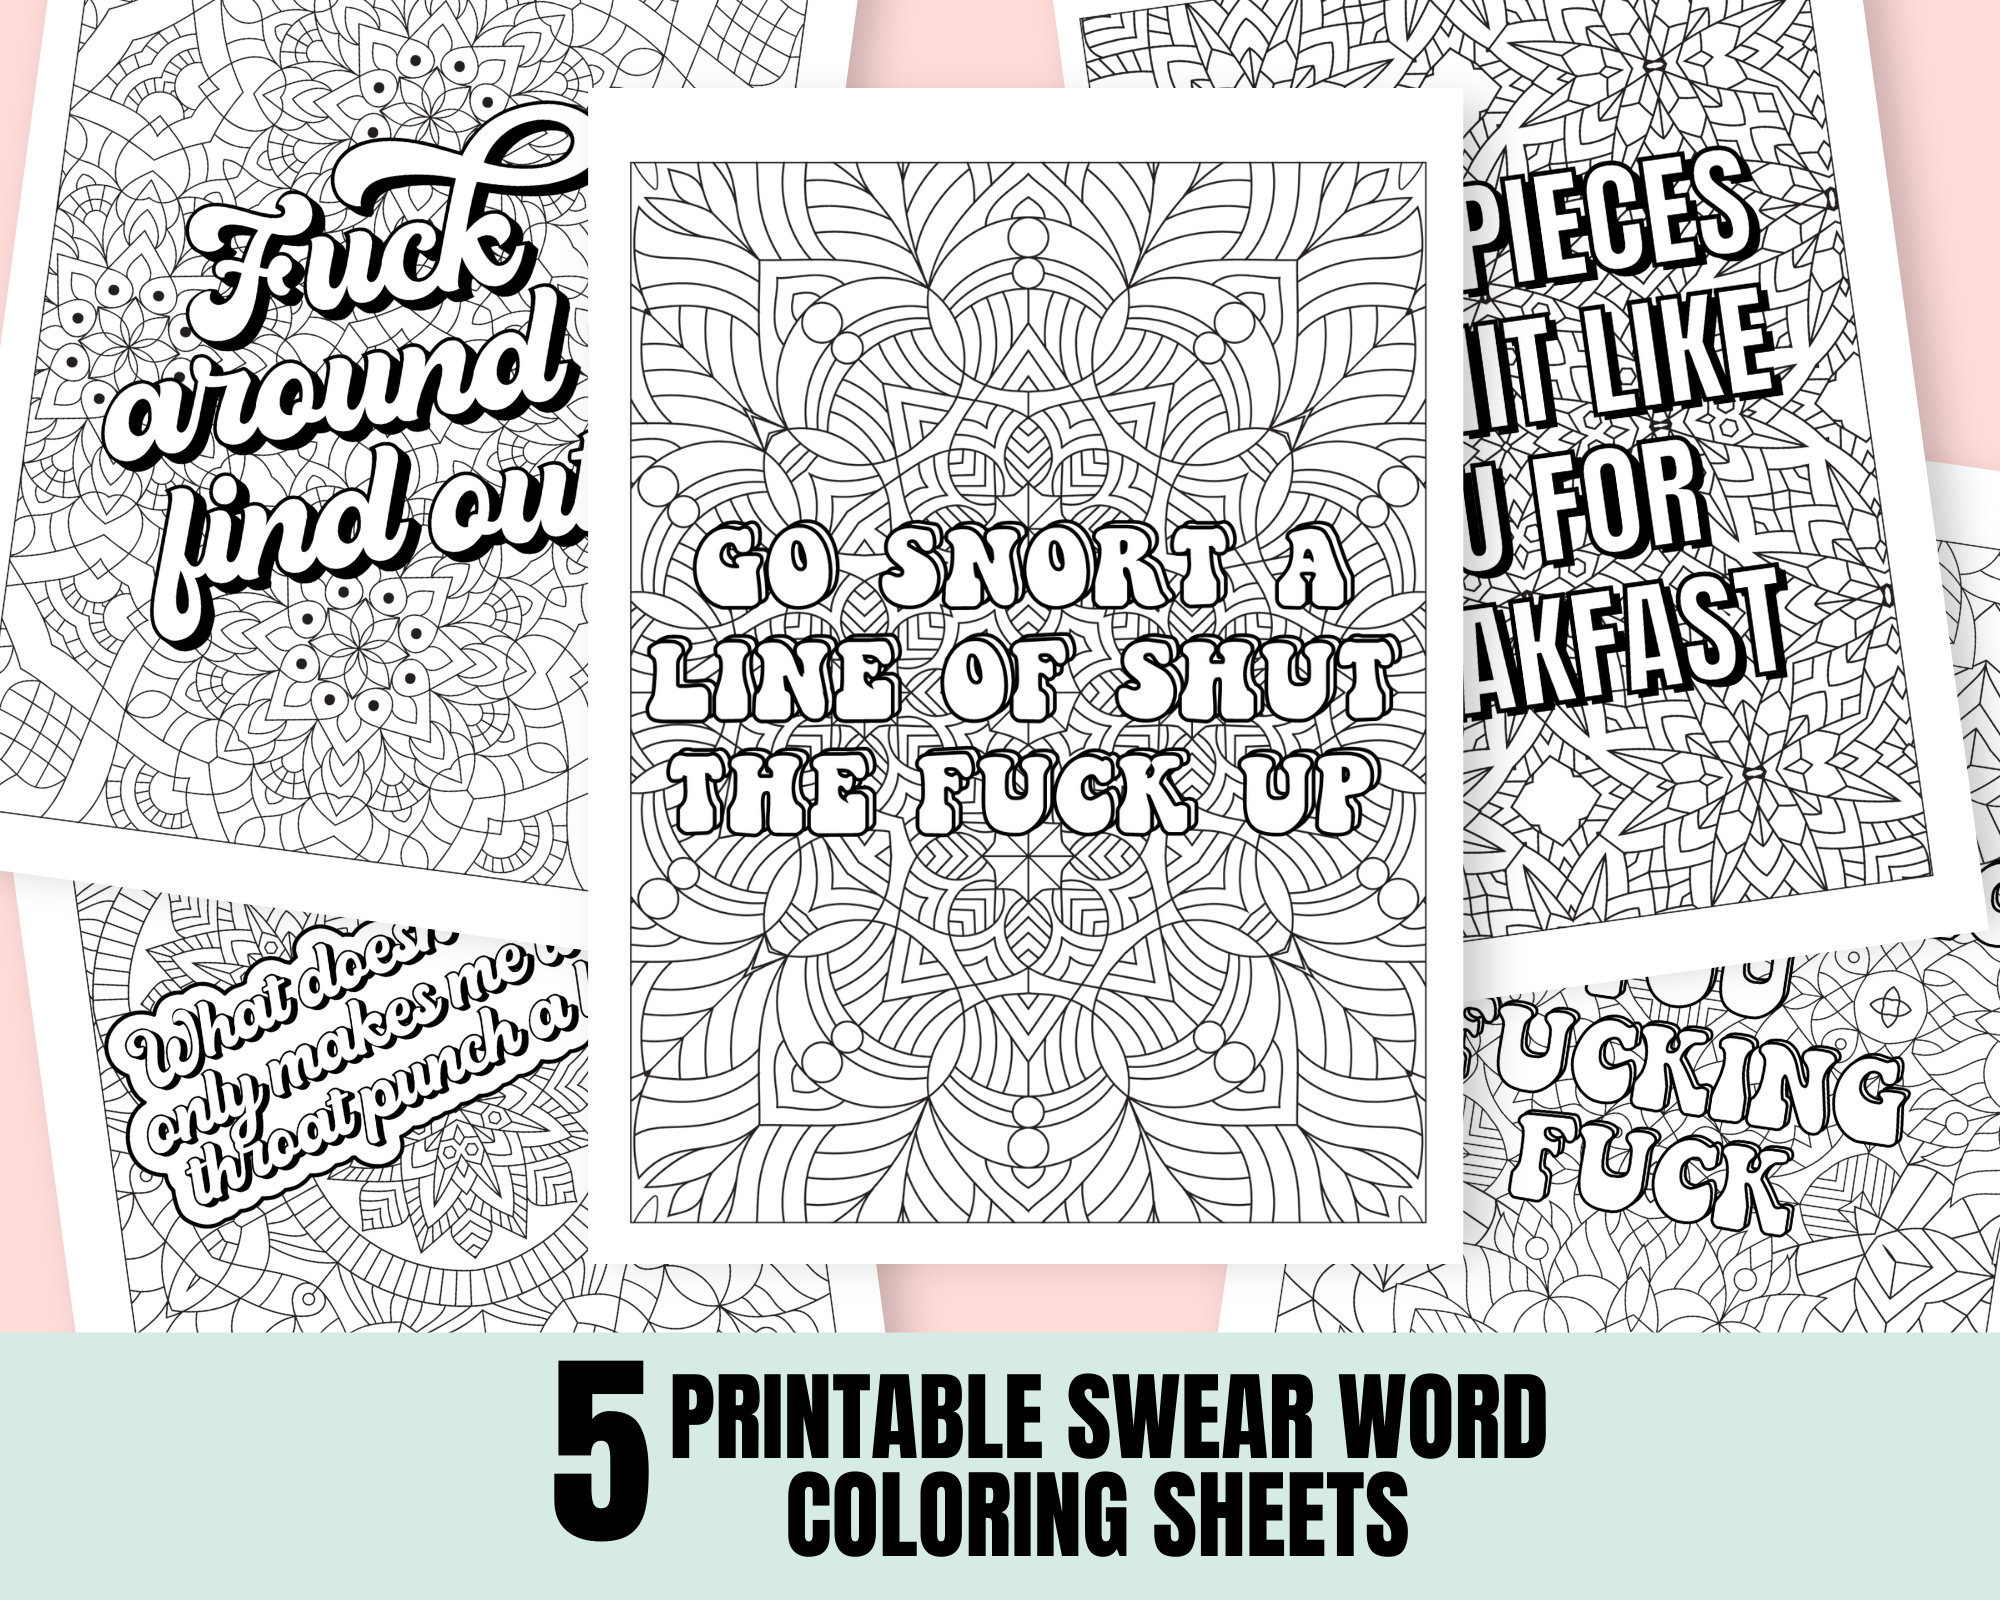 Adult coloring pages printable printable coloring sheets coloring pages swear word coloring pages funny coloring sheet curse words